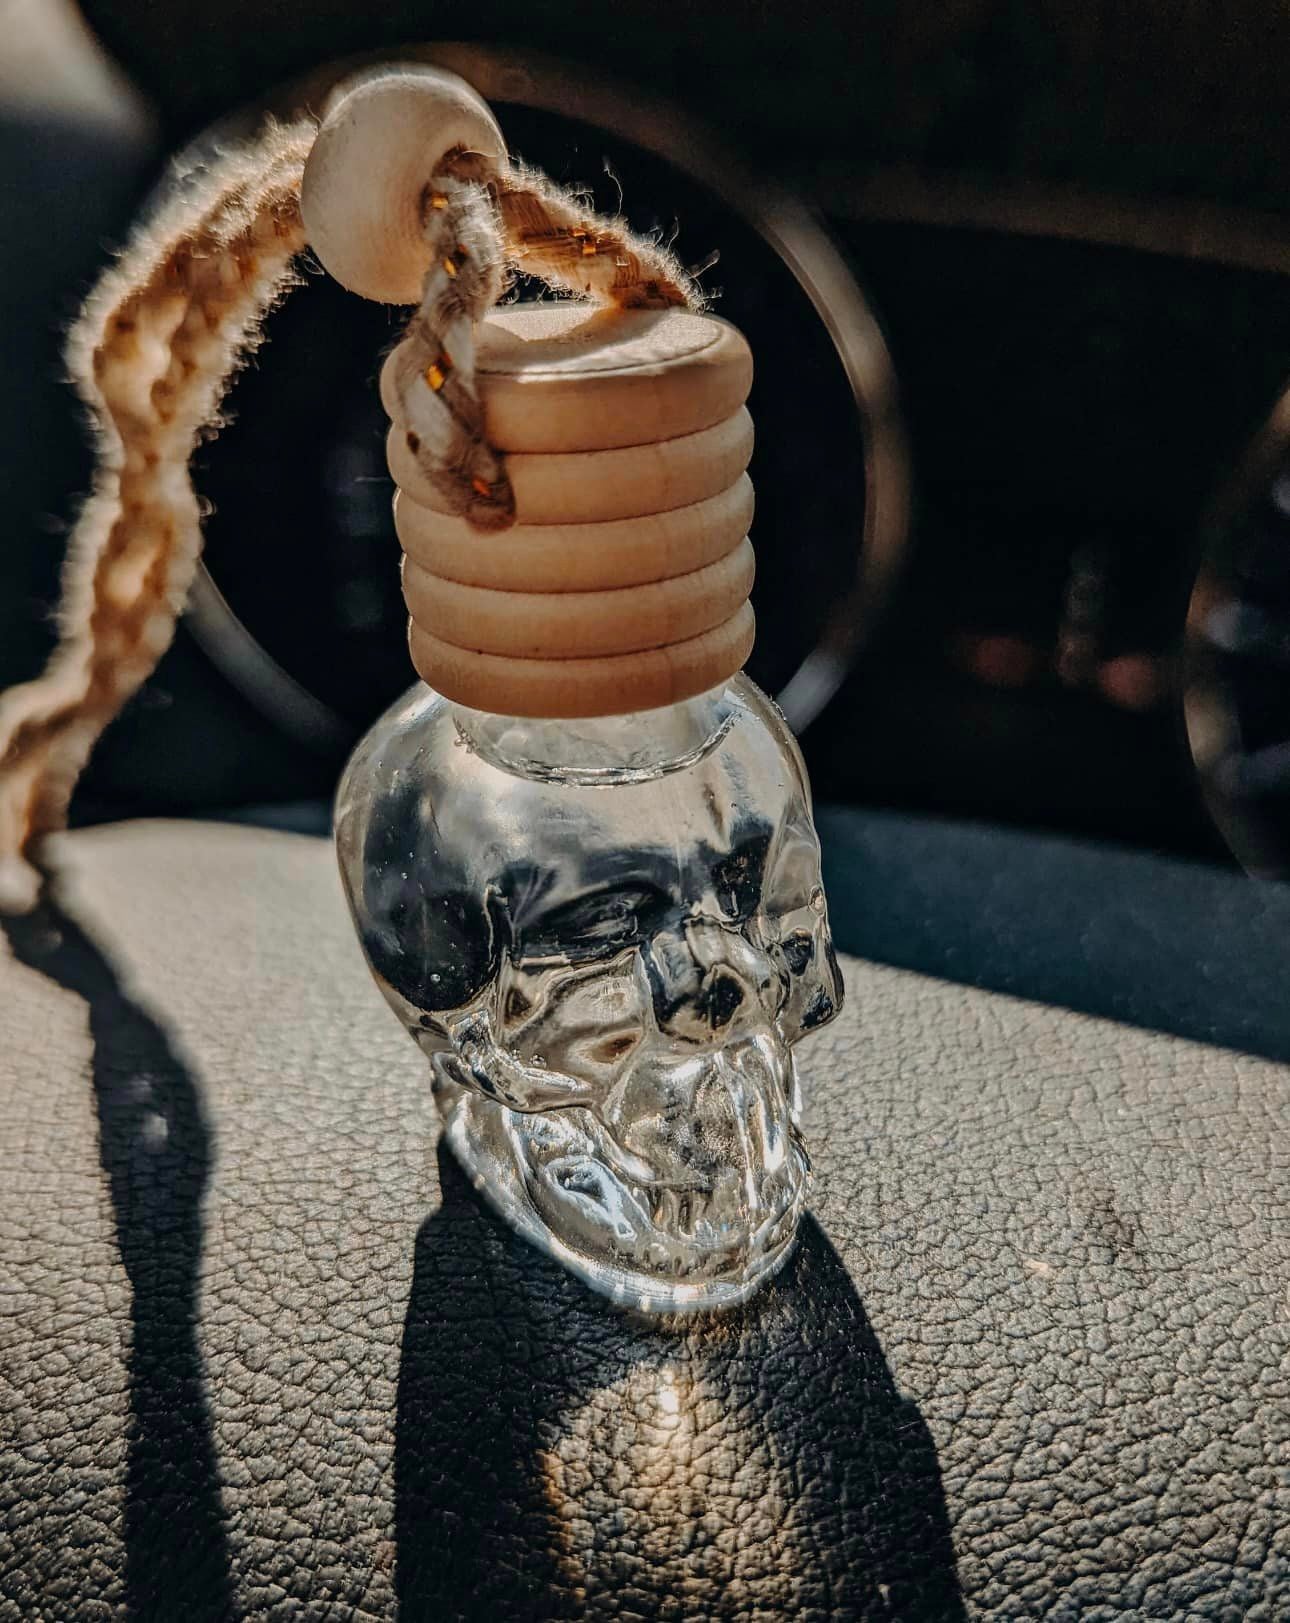 Skull Car Diffuser - 1 For $10.50 or 3 For $27